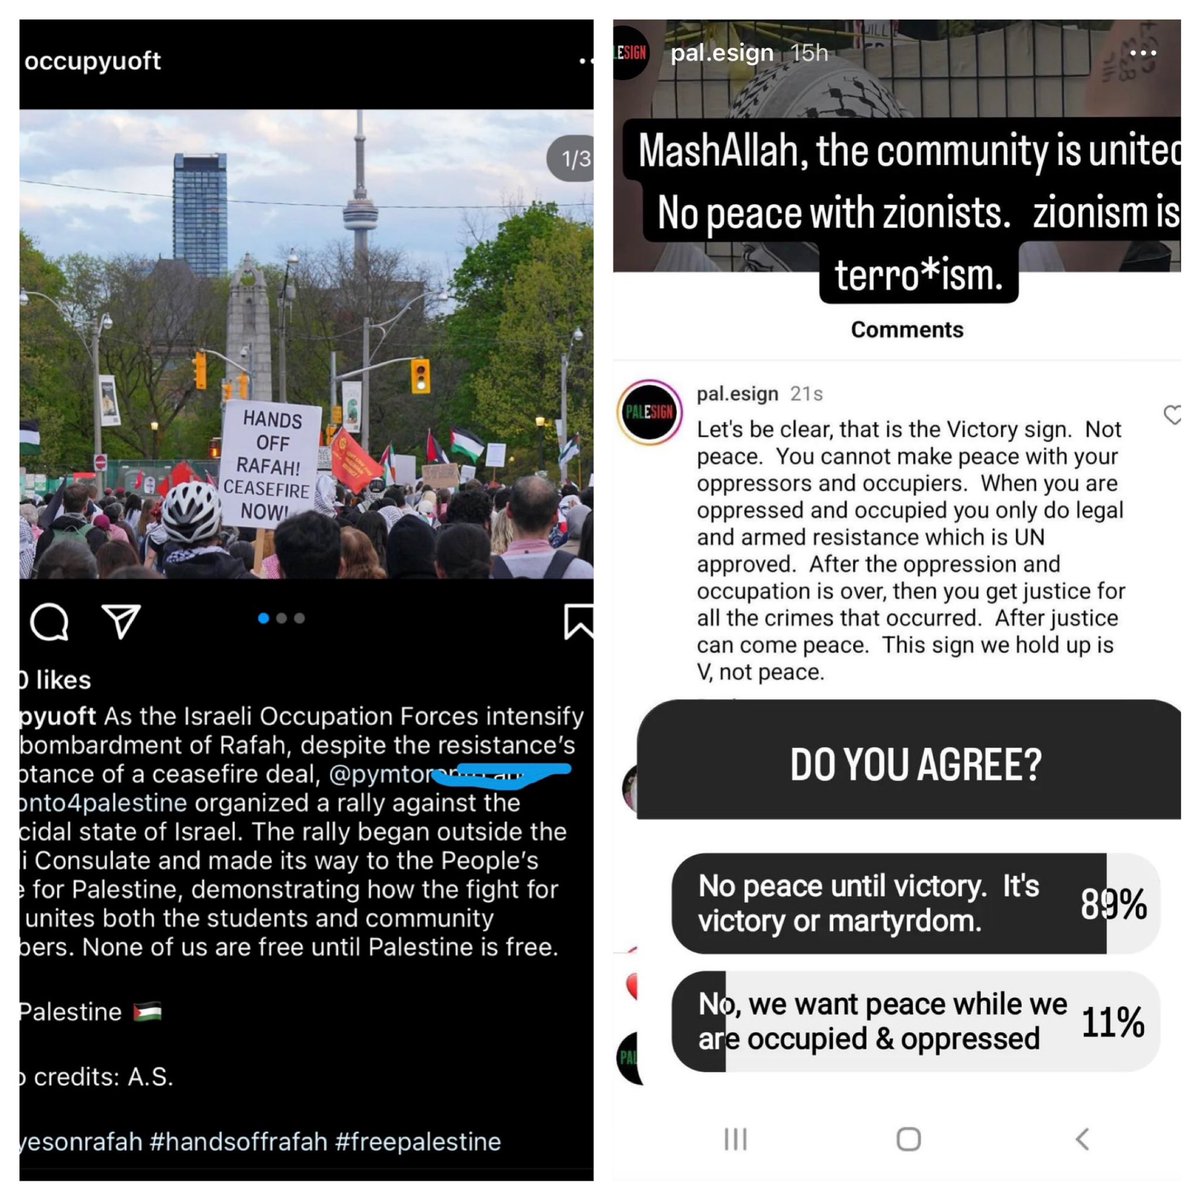 'Occupy UofT' calling Hamas murderers 'the resistance.' Federally-registered non-profit 'Pal.Esign' advocating for 'martyrdom' in Canada. These things are happening right now. Right now, where you live. #cdnpoli